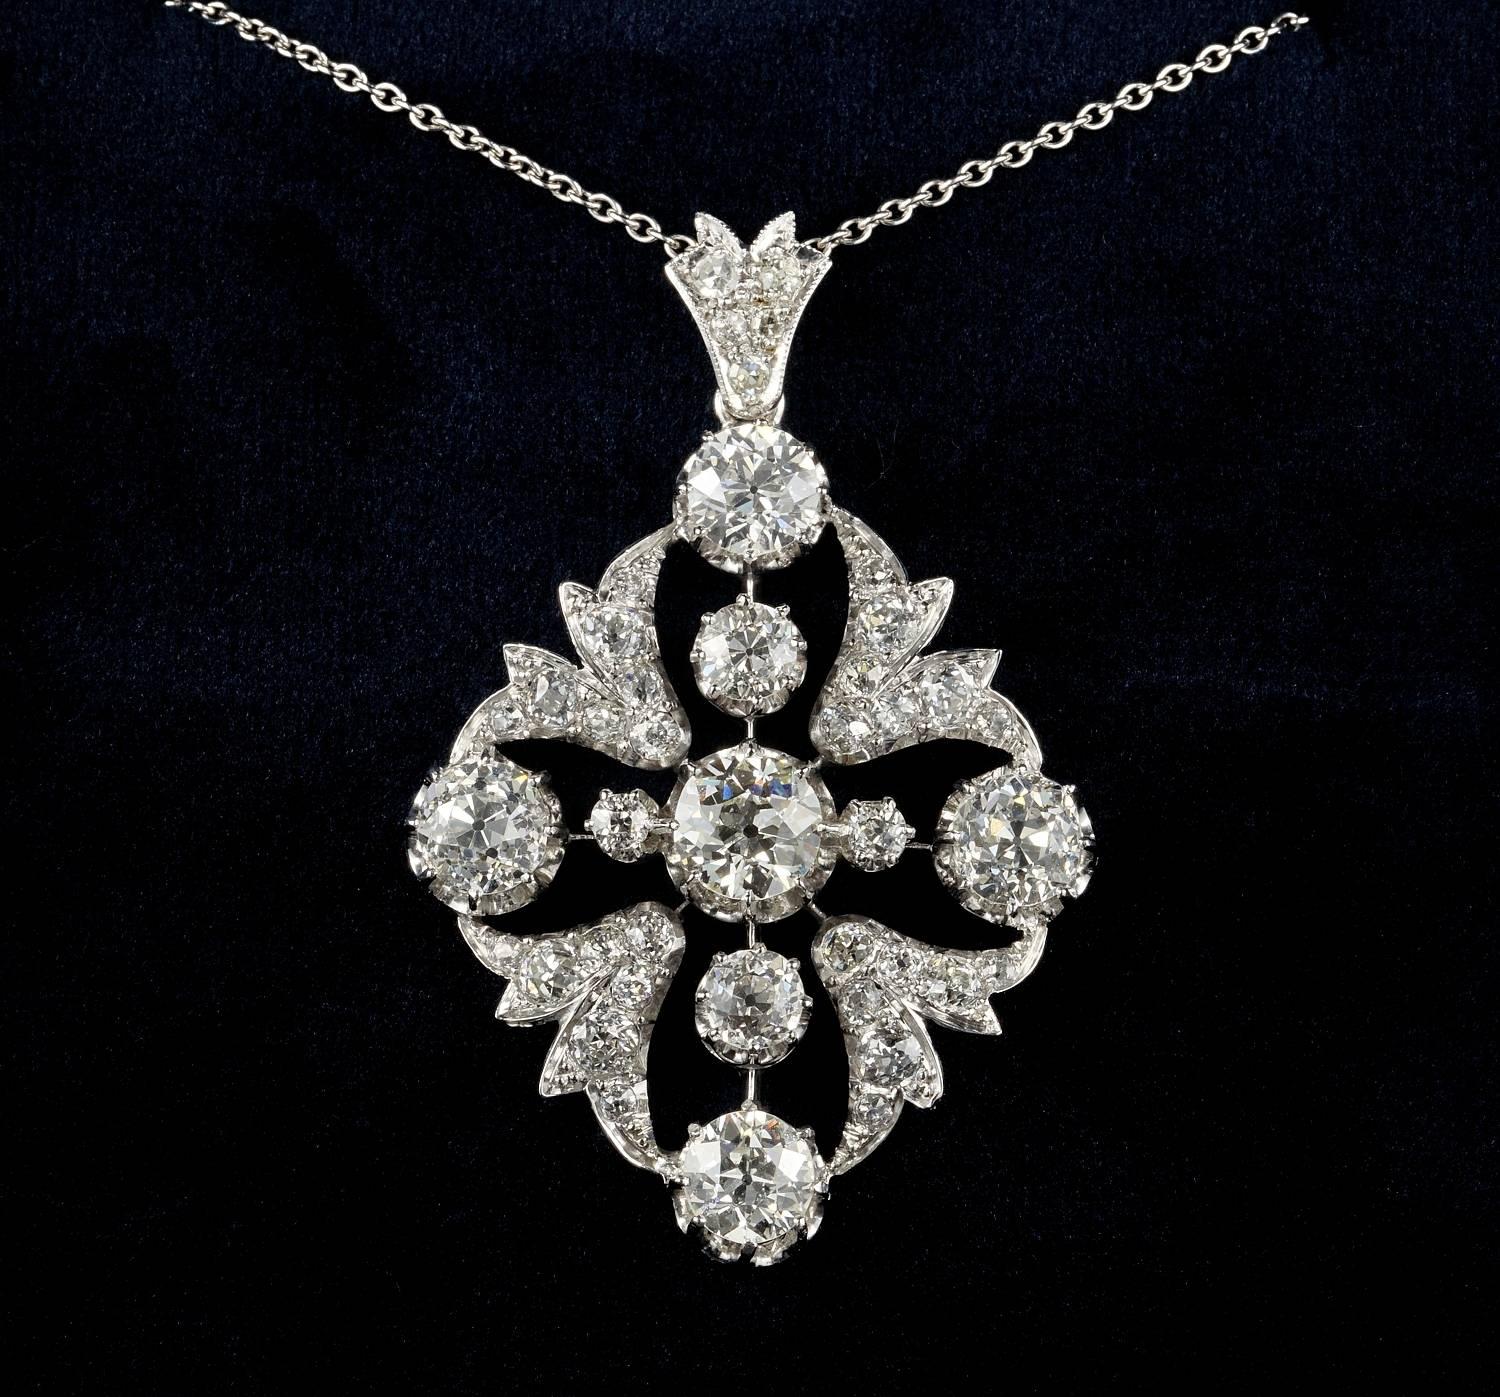 An impressive authentic Edwardian large sized Diamond pendant
The striking naturalistic design is literally overwhelmed by large sized old mine cut Diamonds
Superbly hand crafted of solid Platinum with 18 Kt accent of work at the back side -tested.